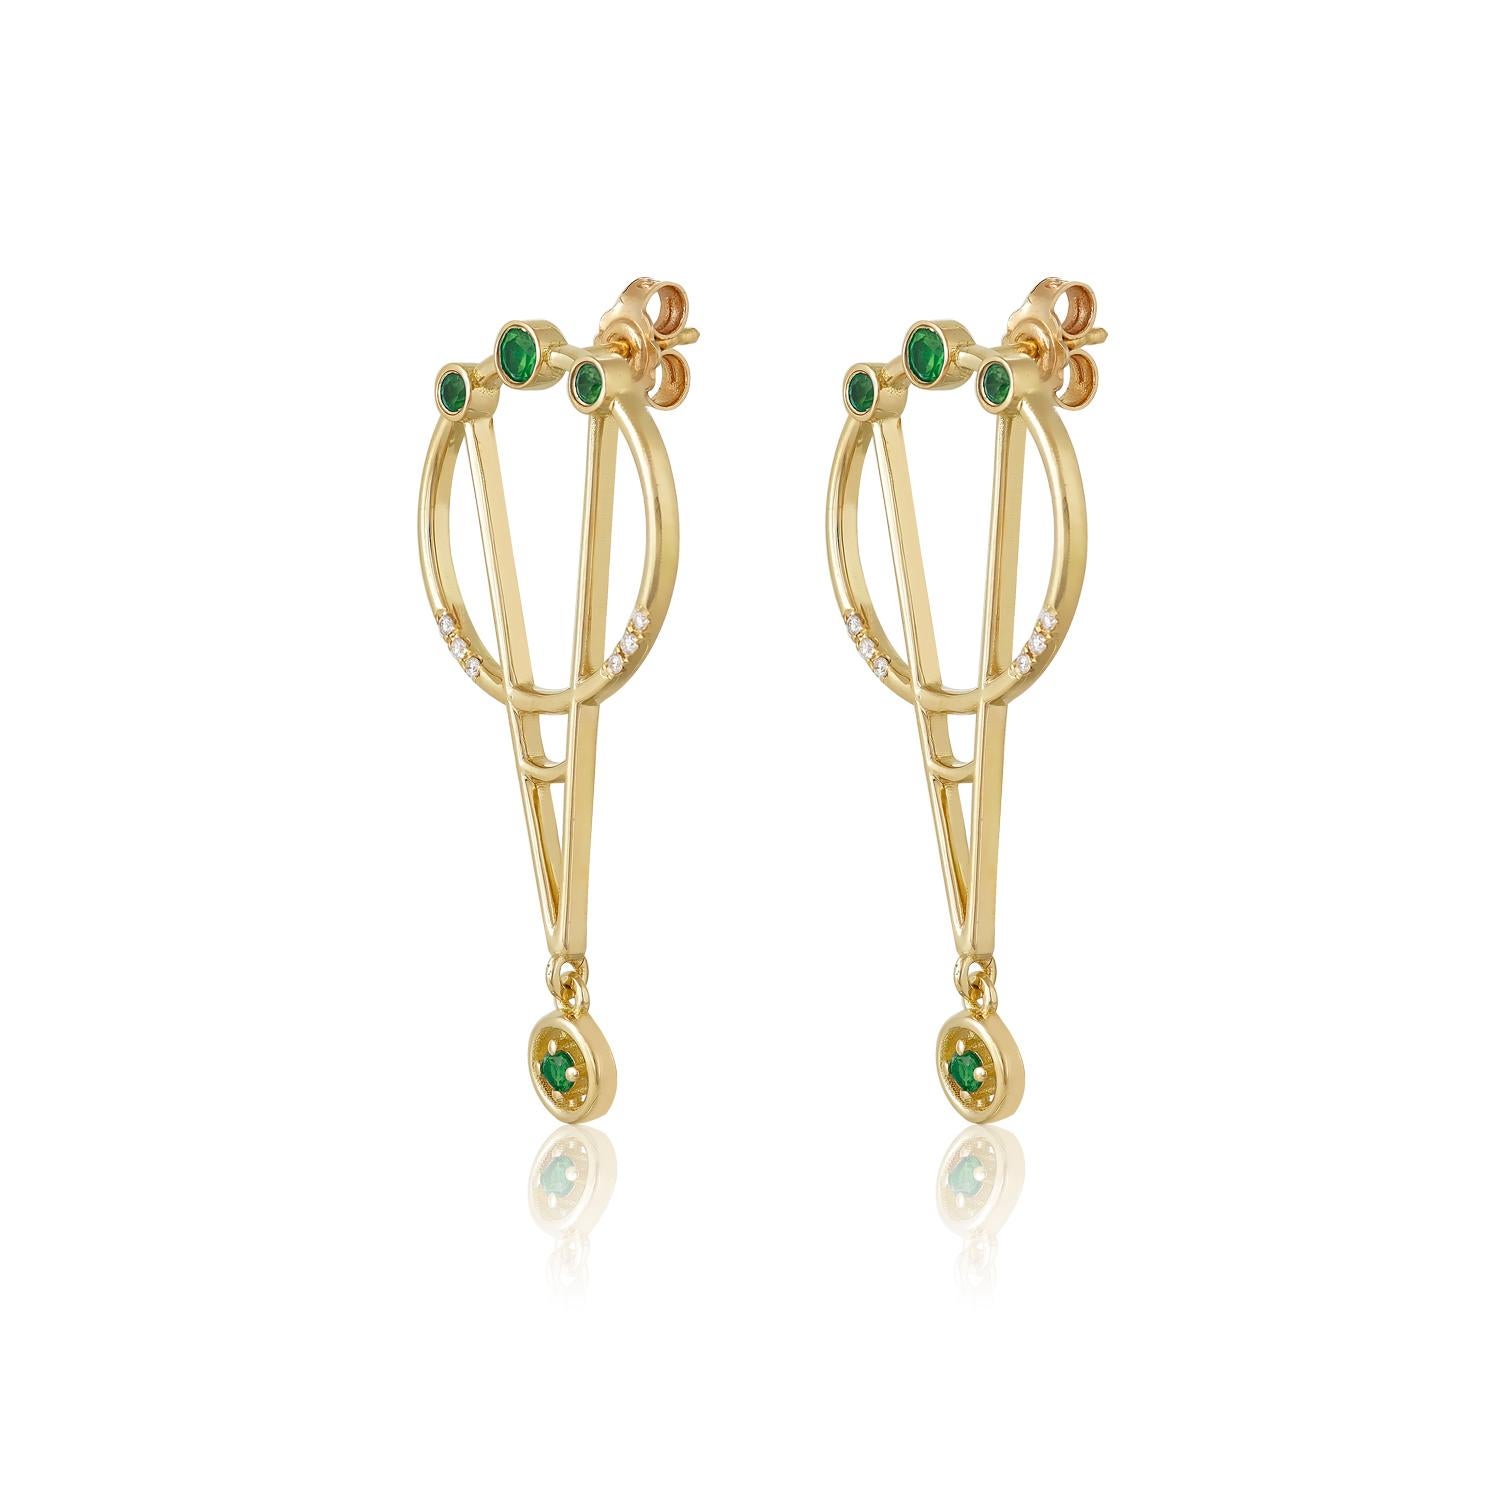 Designer: Alexia Gryllaki
Dimensions: L37x17mm
Weight: approximately 6.2g (pair)
Barcode: ING030EE

The Interlocking Geometry earrings in 18 karat yellow gold with emeralds approx. 0.40cts and round brilliant-cut diamonds approx. 0.06cts.

About the